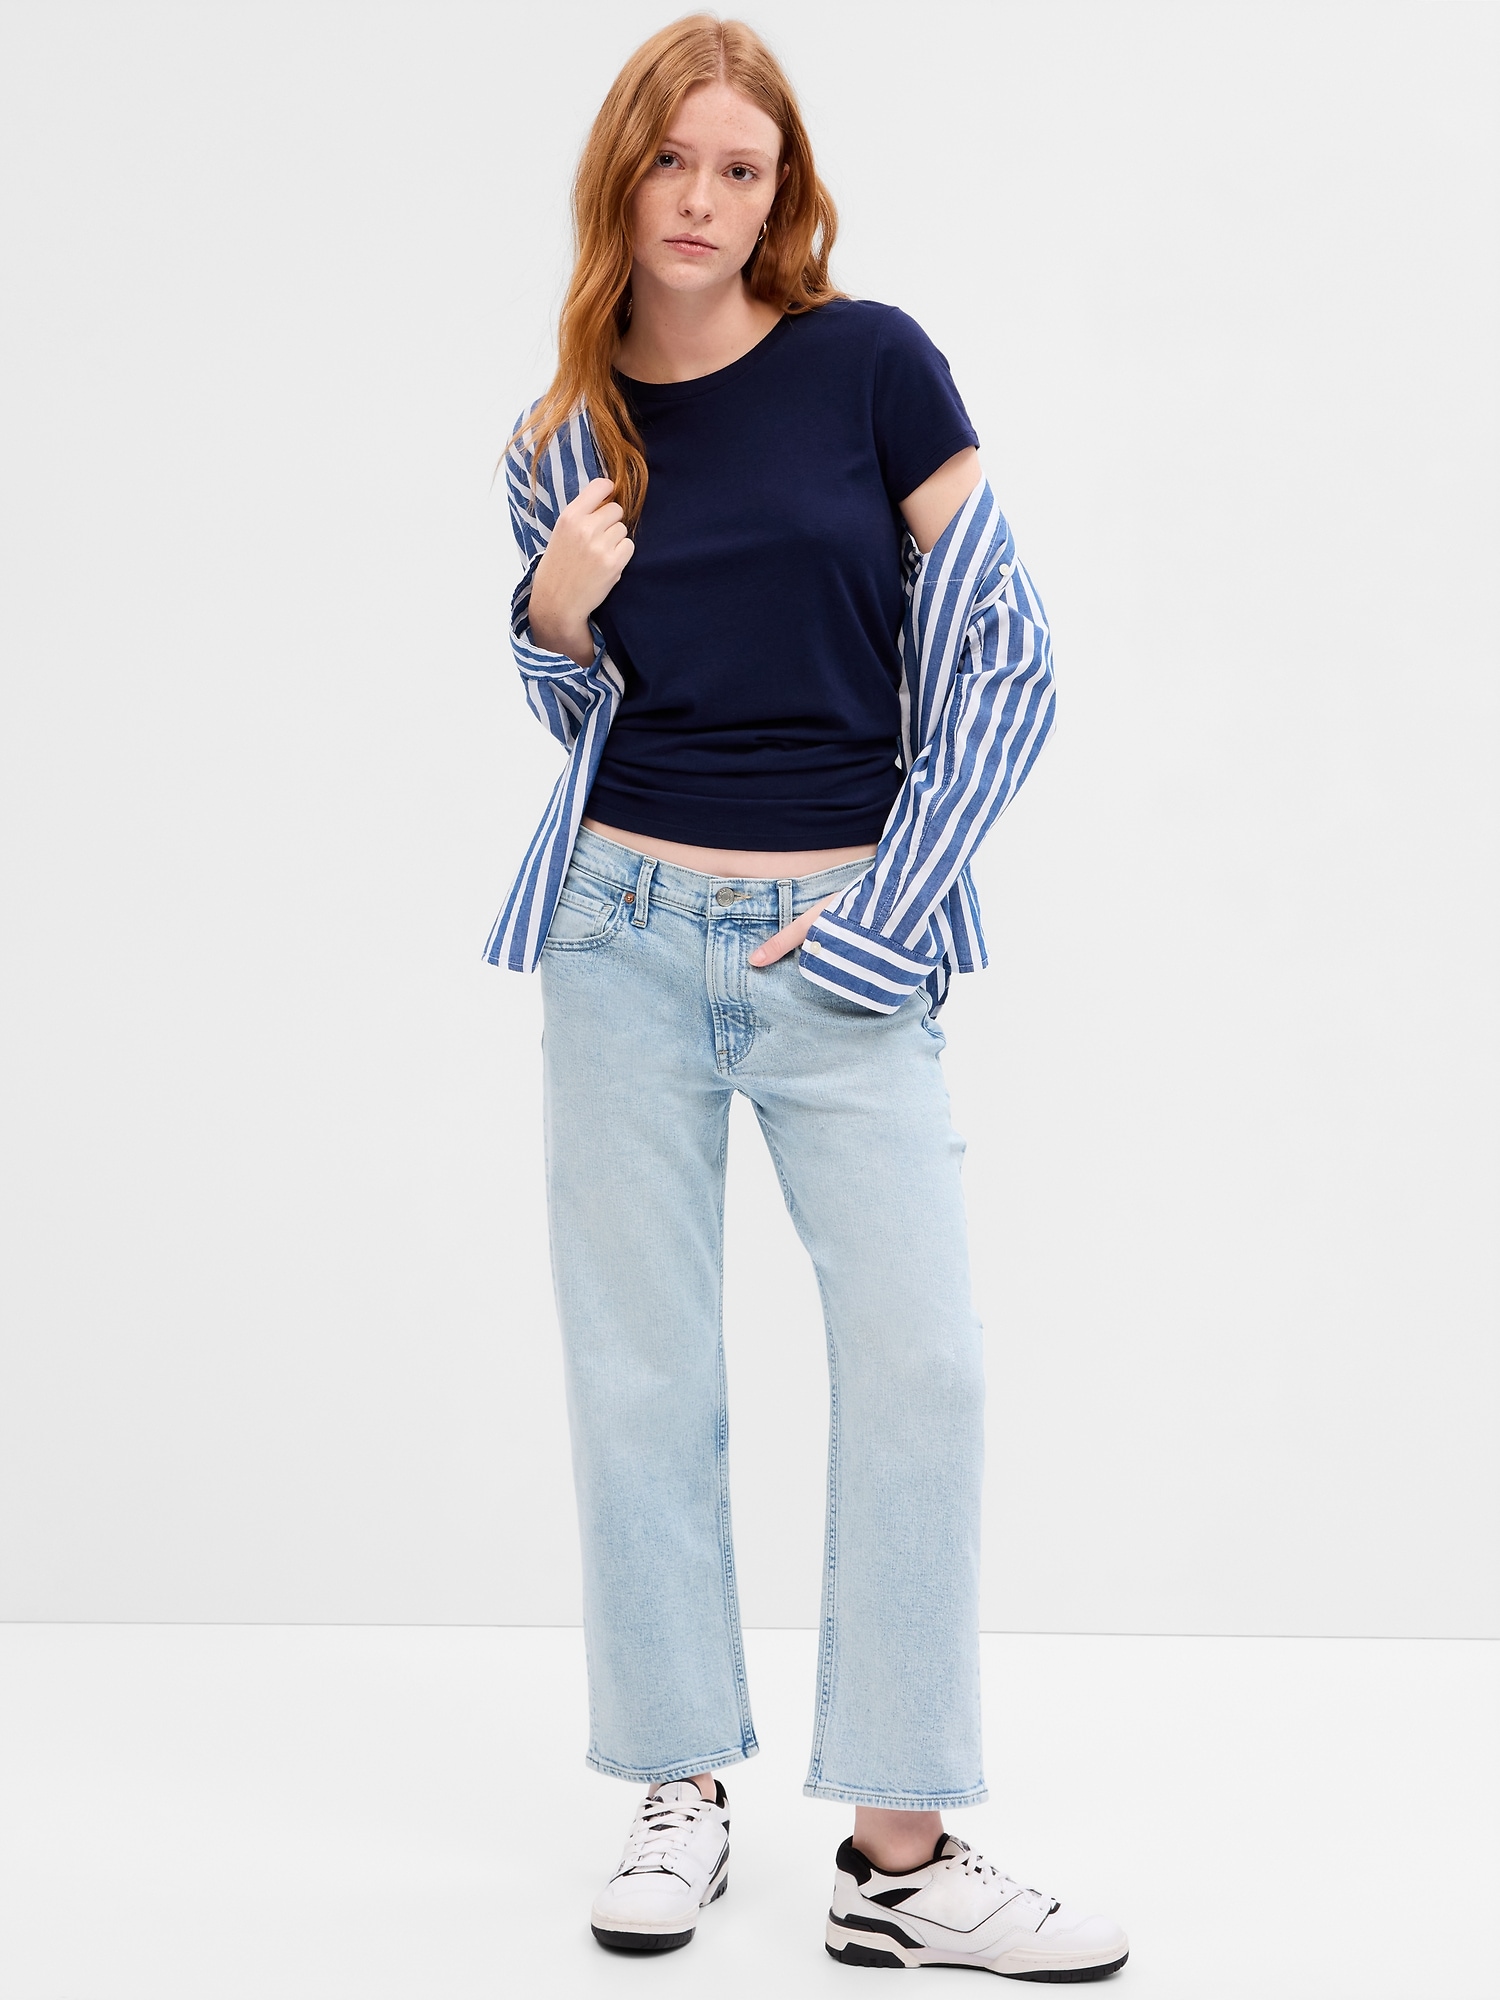 Low Rise Straight Crop Jeans | Gap Factory